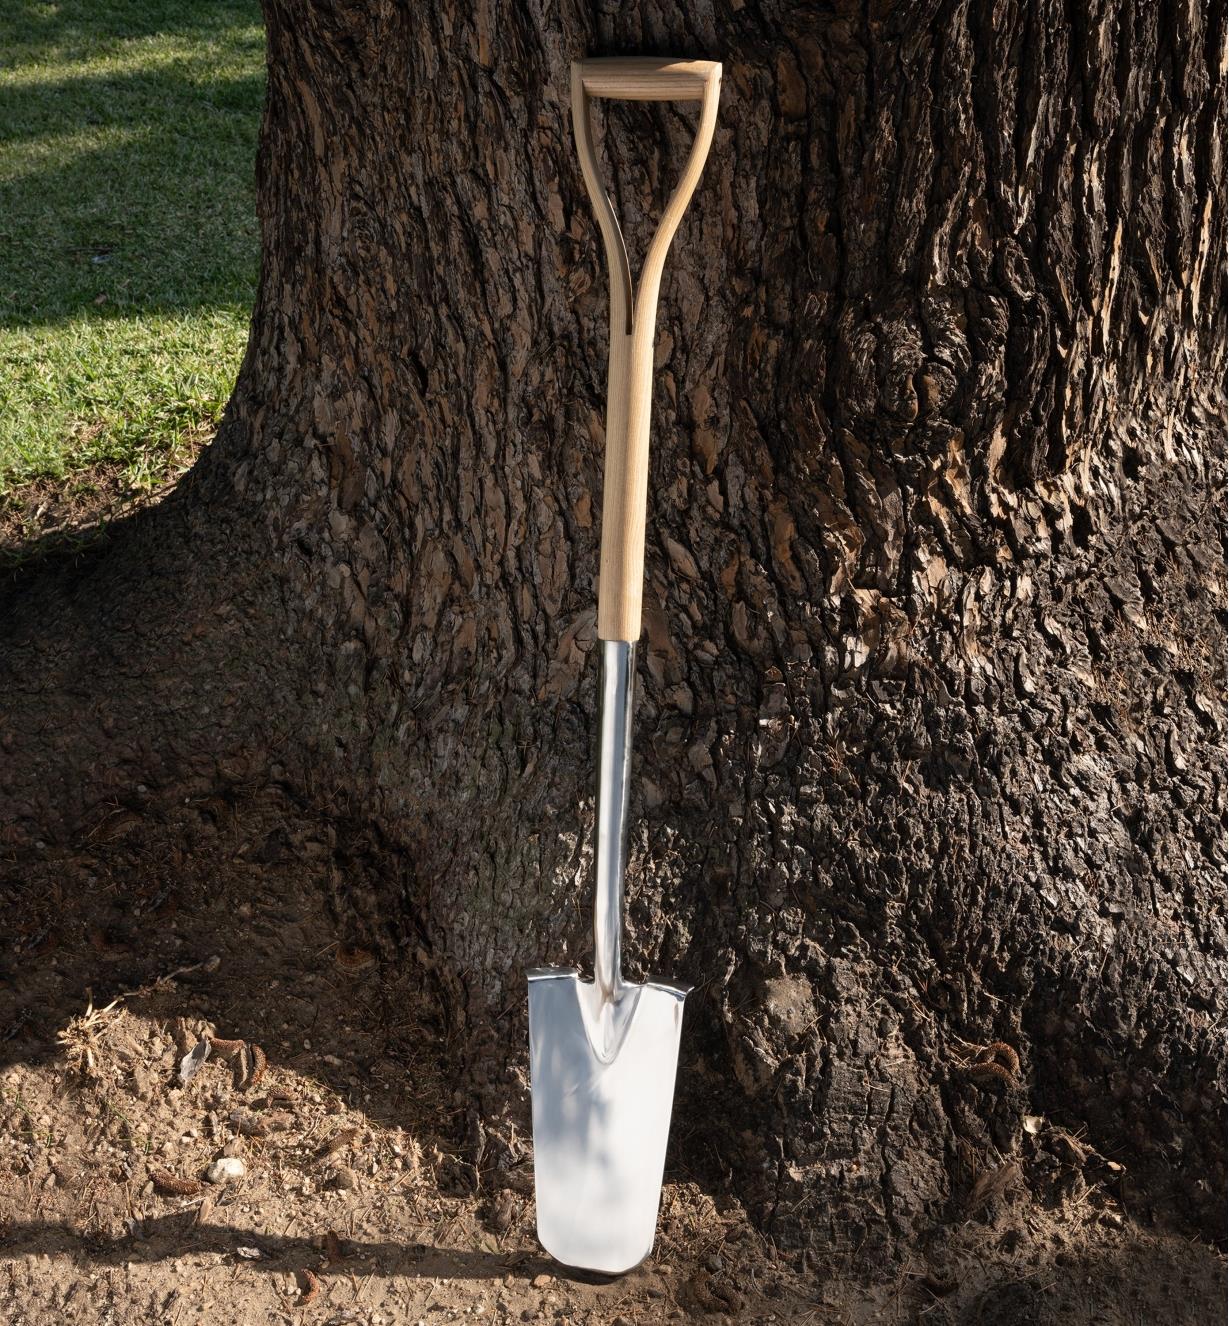 The transplant spade leans up against a tree